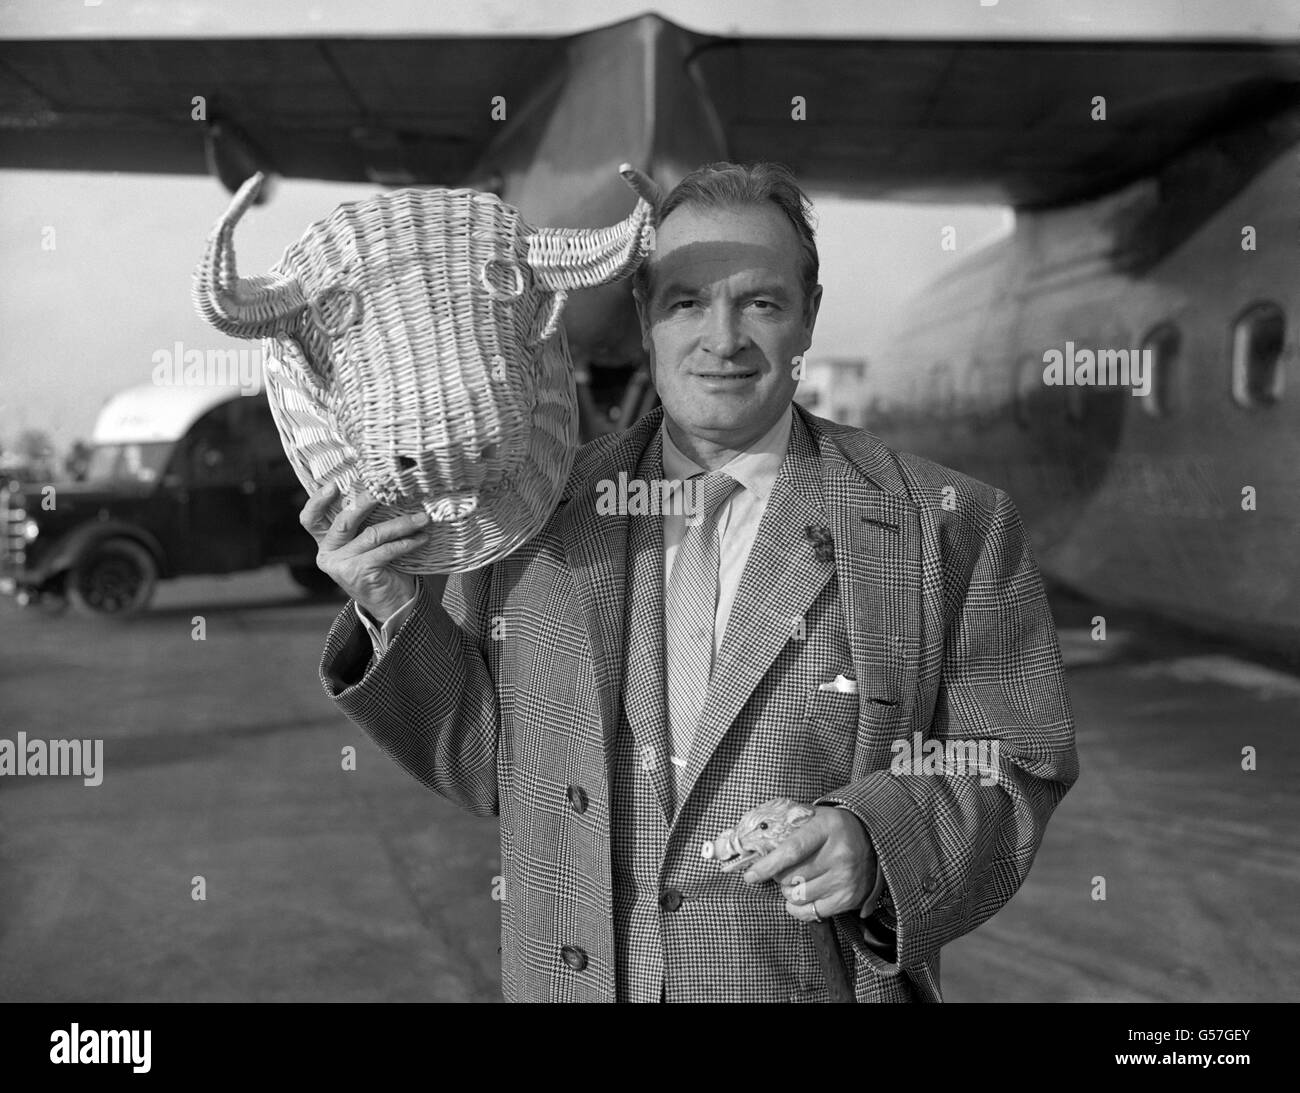 American entertainer Bob Hope hopping back from across Europe after a flying visit to Madrid pictured at London Airport with a souvenir, called 'Crosby', from Spain. Stock Photo